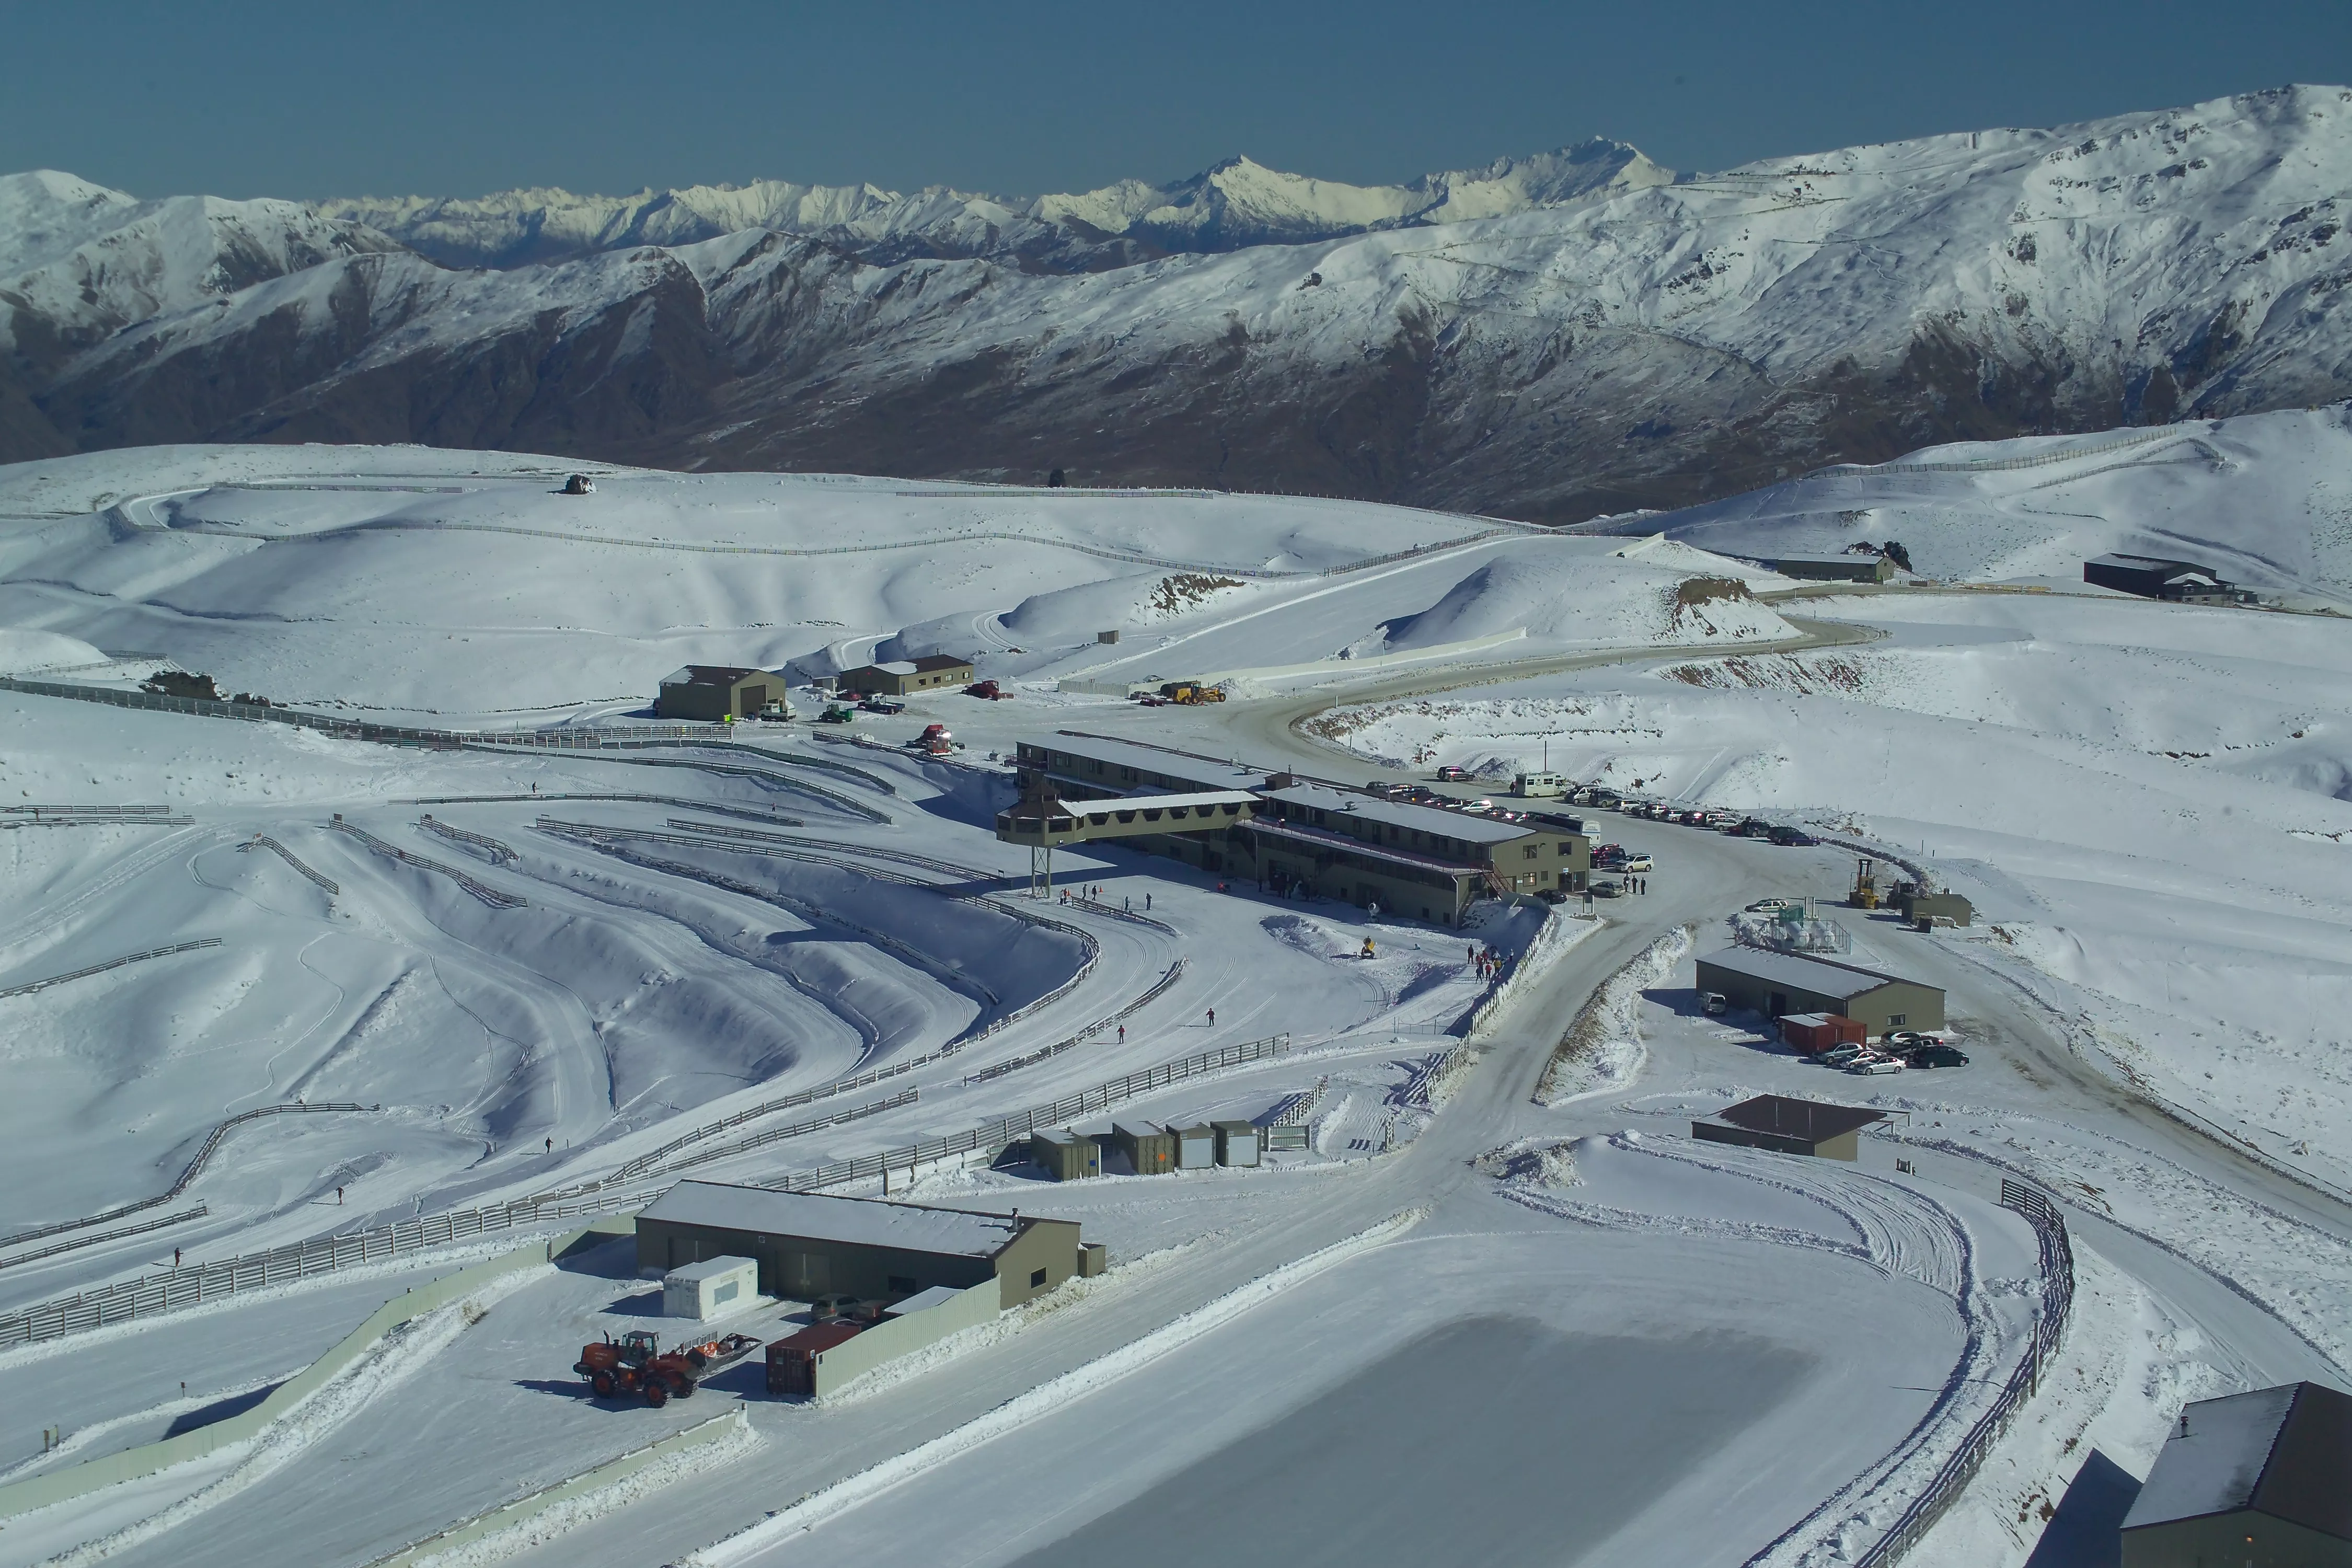 Snow Farm NZ in New Zealand, Australia and Oceania | Skiing - Rated 4